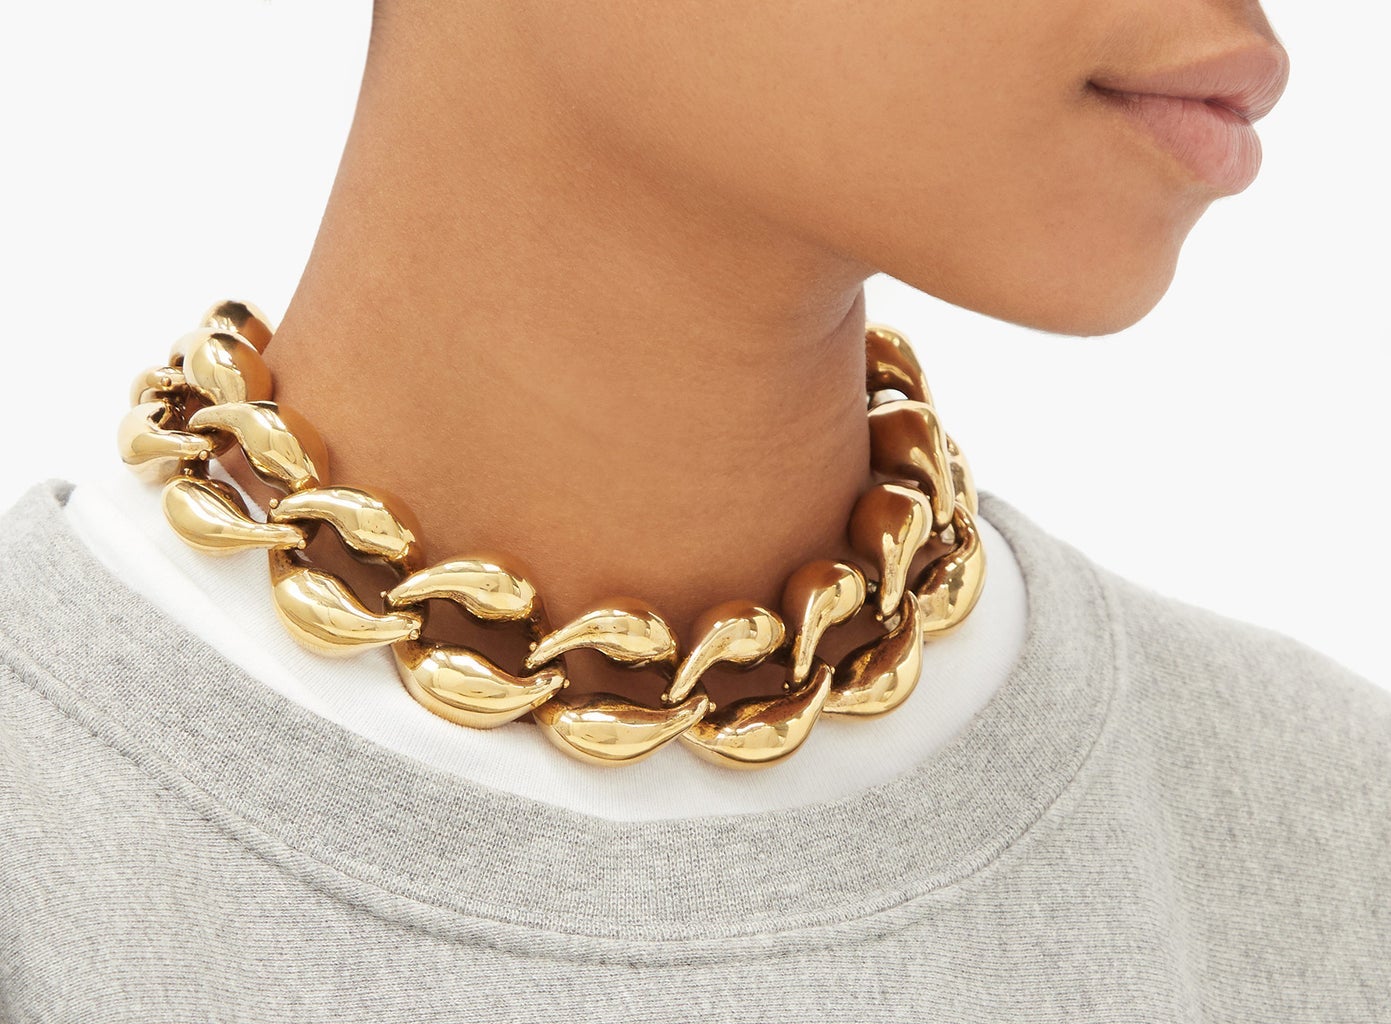 5 chain necklaces to channel the '90s — Hashtag Legend